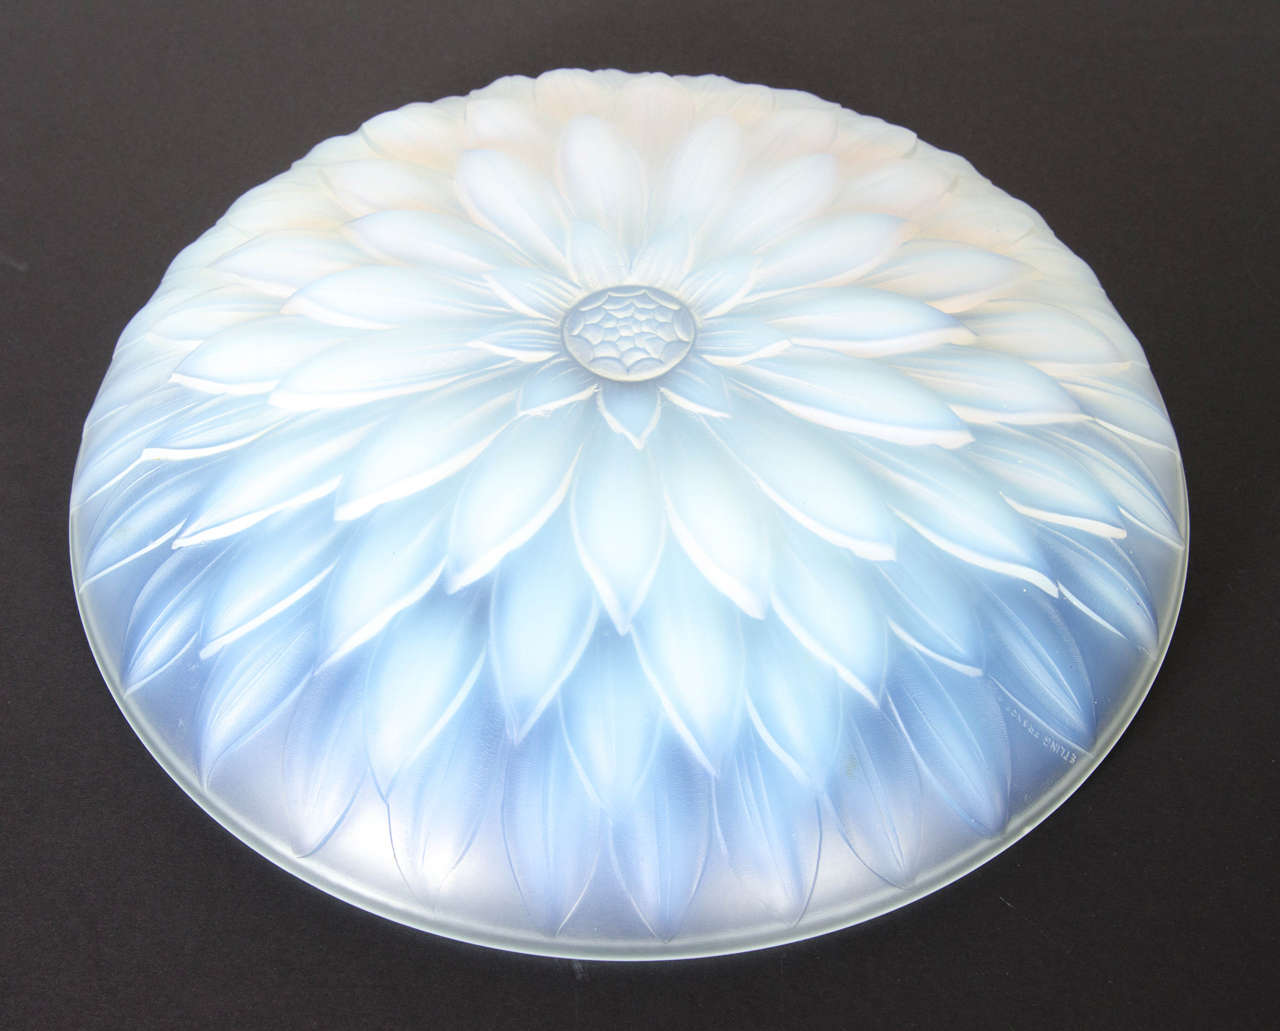 This gorgeous bowl features an features a stylized Art Deco floral design in relief frosted iridescent glass. It is also is signed Etling, France on the bowl as well.